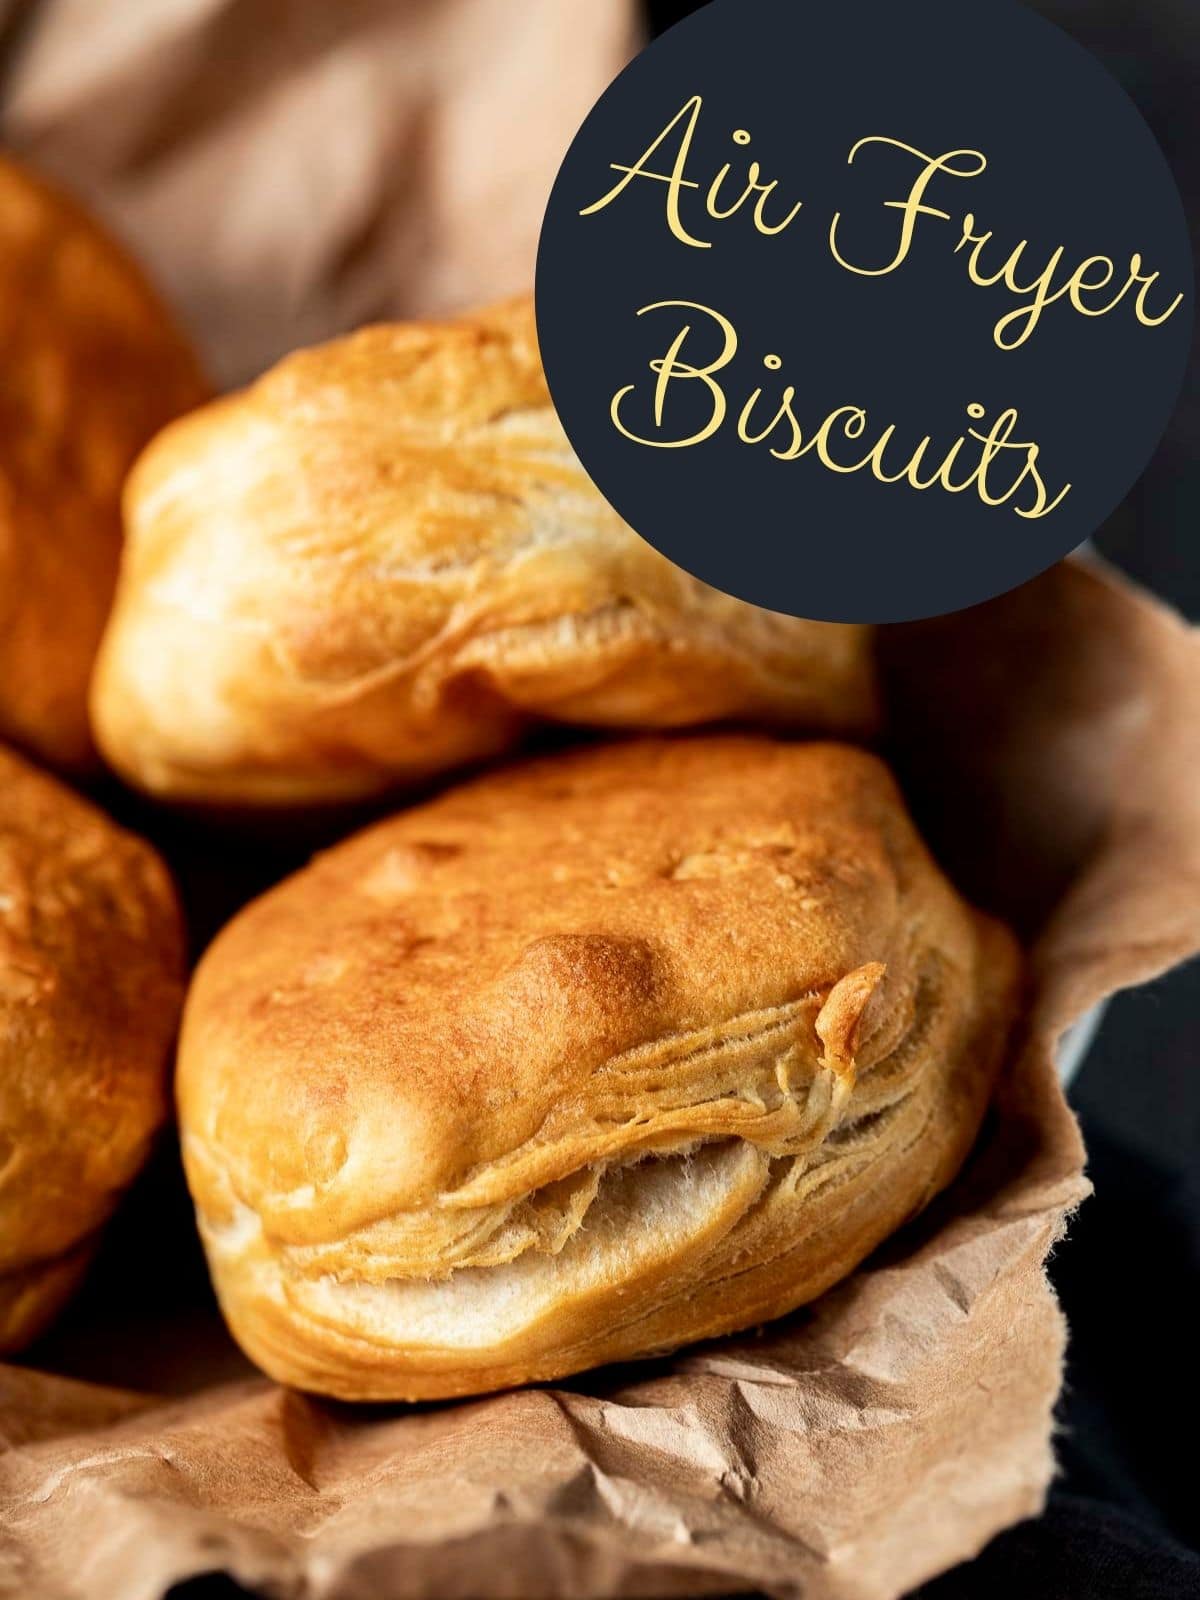 Air Fryer Biscuits (Canned)